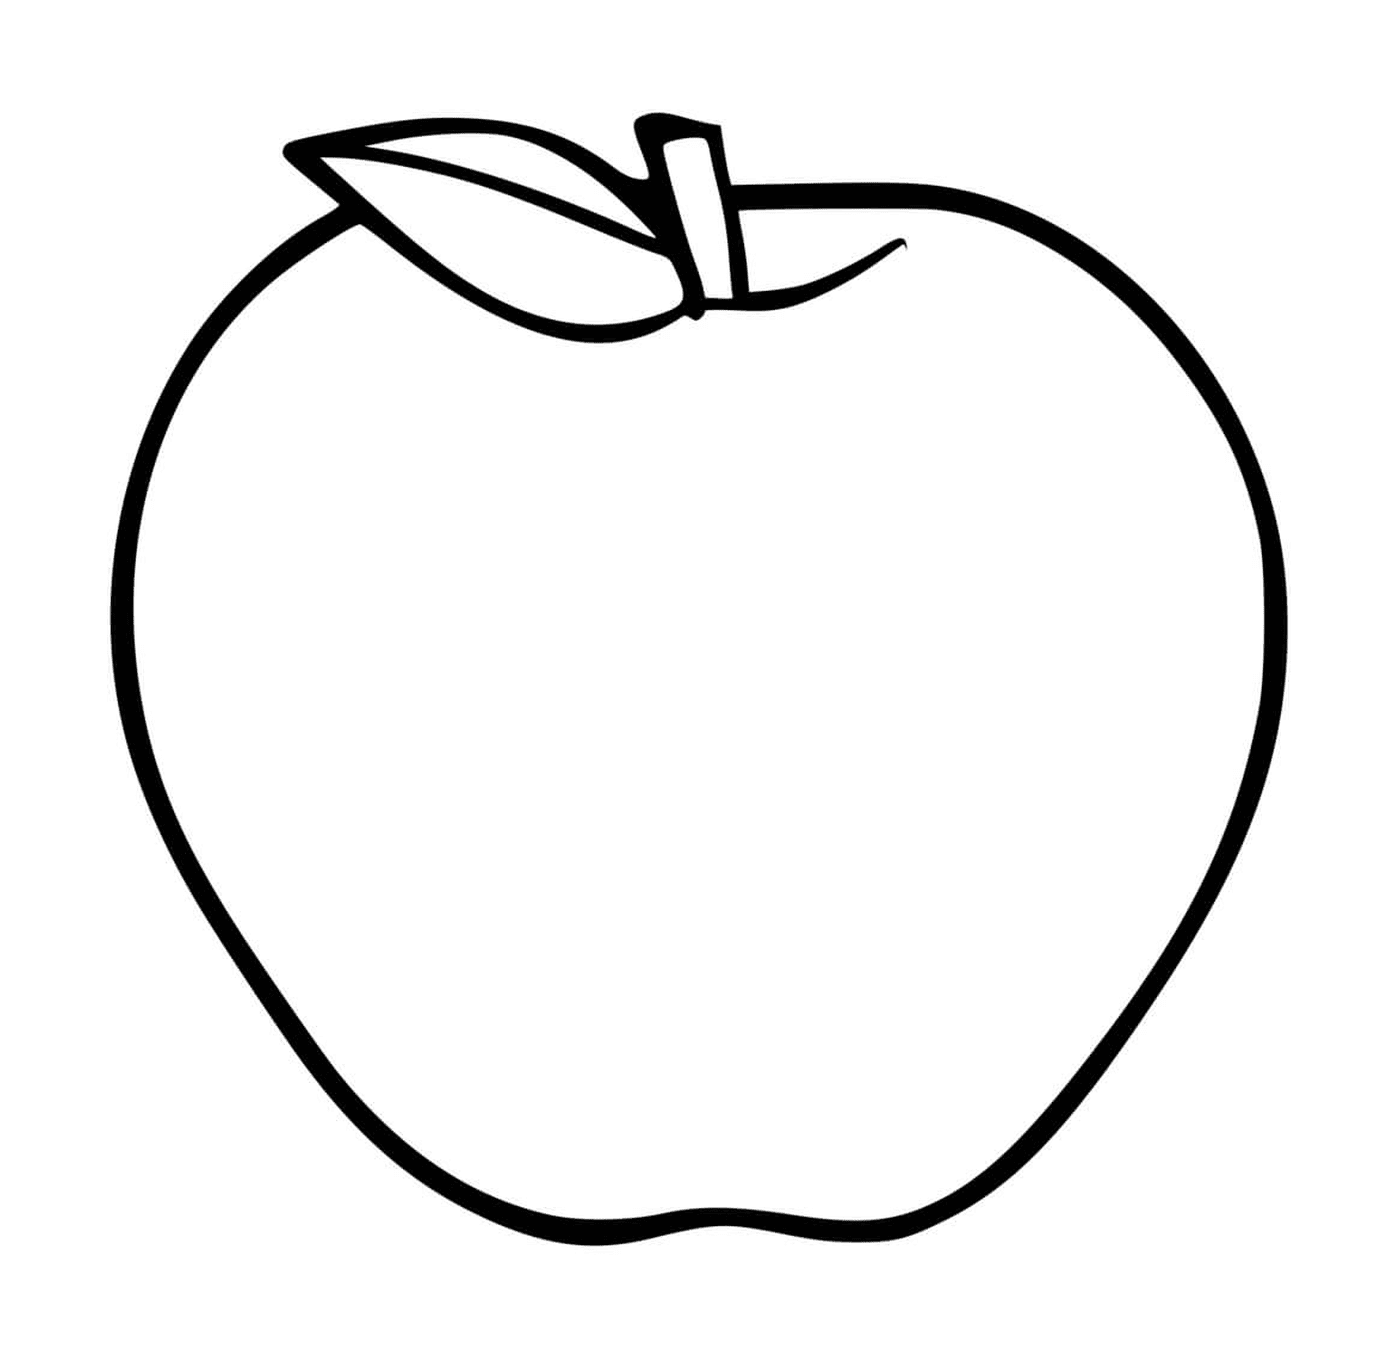  Apple produced by an apple tree 